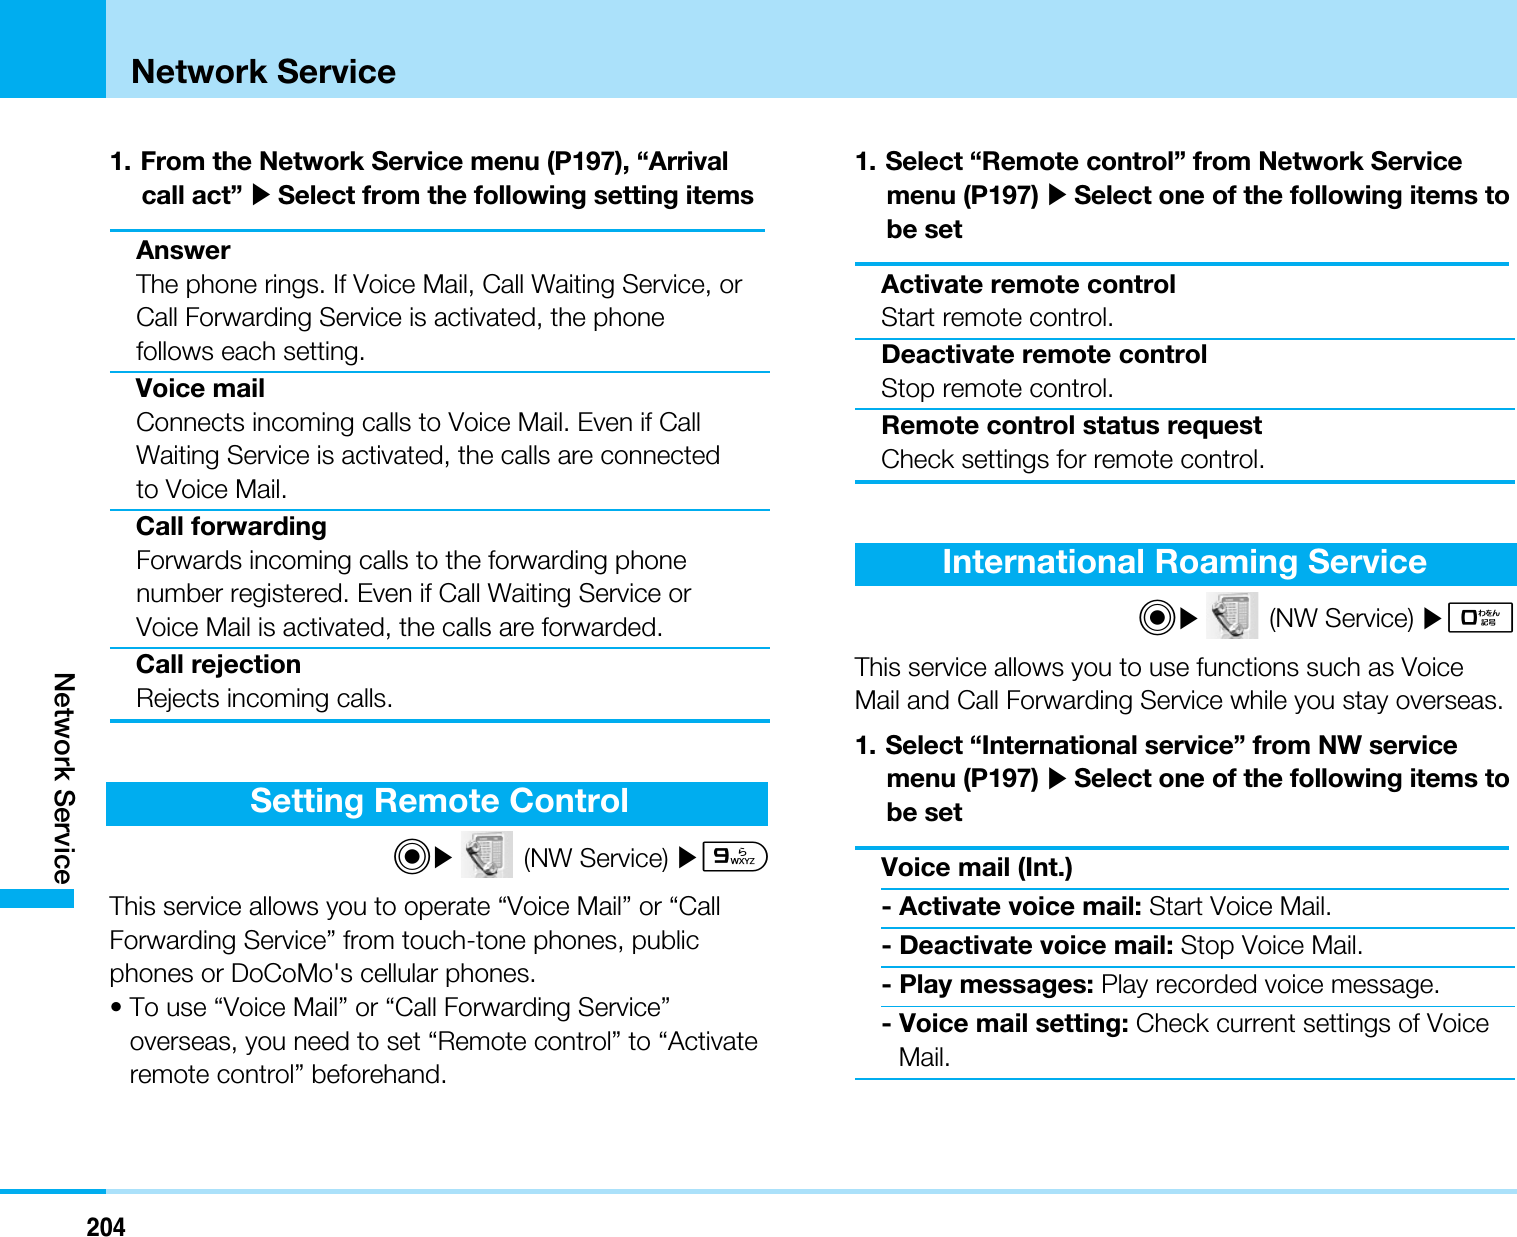 204Network ServiceNetwork Service1. From the Network Service menu (P197), “Arrivalcall act” ]Select from the following setting itemsAnswerThe phone rings. If Voice Mail, Call Waiting Service, orCall Forwarding Service is activated, the phonefollows each setting.Voice mailConnects incoming calls to Voice Mail. Even if CallWaiting Service is activated, the calls are connectedto Voice Mail.Call forwardingForwards incoming calls to the forwarding phonenumber registered. Even if Call Waiting Service orVoice Mail is activated, the calls are forwarded.Call rejectionRejects incoming calls.Setting Remote ControlC](NW Service) ]9This service allows you to operate “Voice Mail” or “CallForwarding Service” from touch-tone phones, publicphones or DoCoMo&apos;s cellular phones.• To use “Voice Mail” or “Call Forwarding Service”overseas, you need to set “Remote control” to “Activateremote control” beforehand.1. Select “Remote control” from Network Servicemenu (P197) ]Select one of the following items tobe setActivate remote controlStart remote control.Deactivate remote controlStop remote control.Remote control status requestCheck settings for remote control.International Roaming ServiceC](NW Service) ]0This service allows you to use functions such as VoiceMail and Call Forwarding Service while you stay overseas.1. Select “International service” from NW servicemenu (P197) ]Select one of the following items tobe setVoice mail (Int.)- Activate voice mail: Start Voice Mail.- Deactivate voice mail: Stop Voice Mail.- Play messages: Play recorded voice message.- Voice mail setting: Check current settings of VoiceMail.